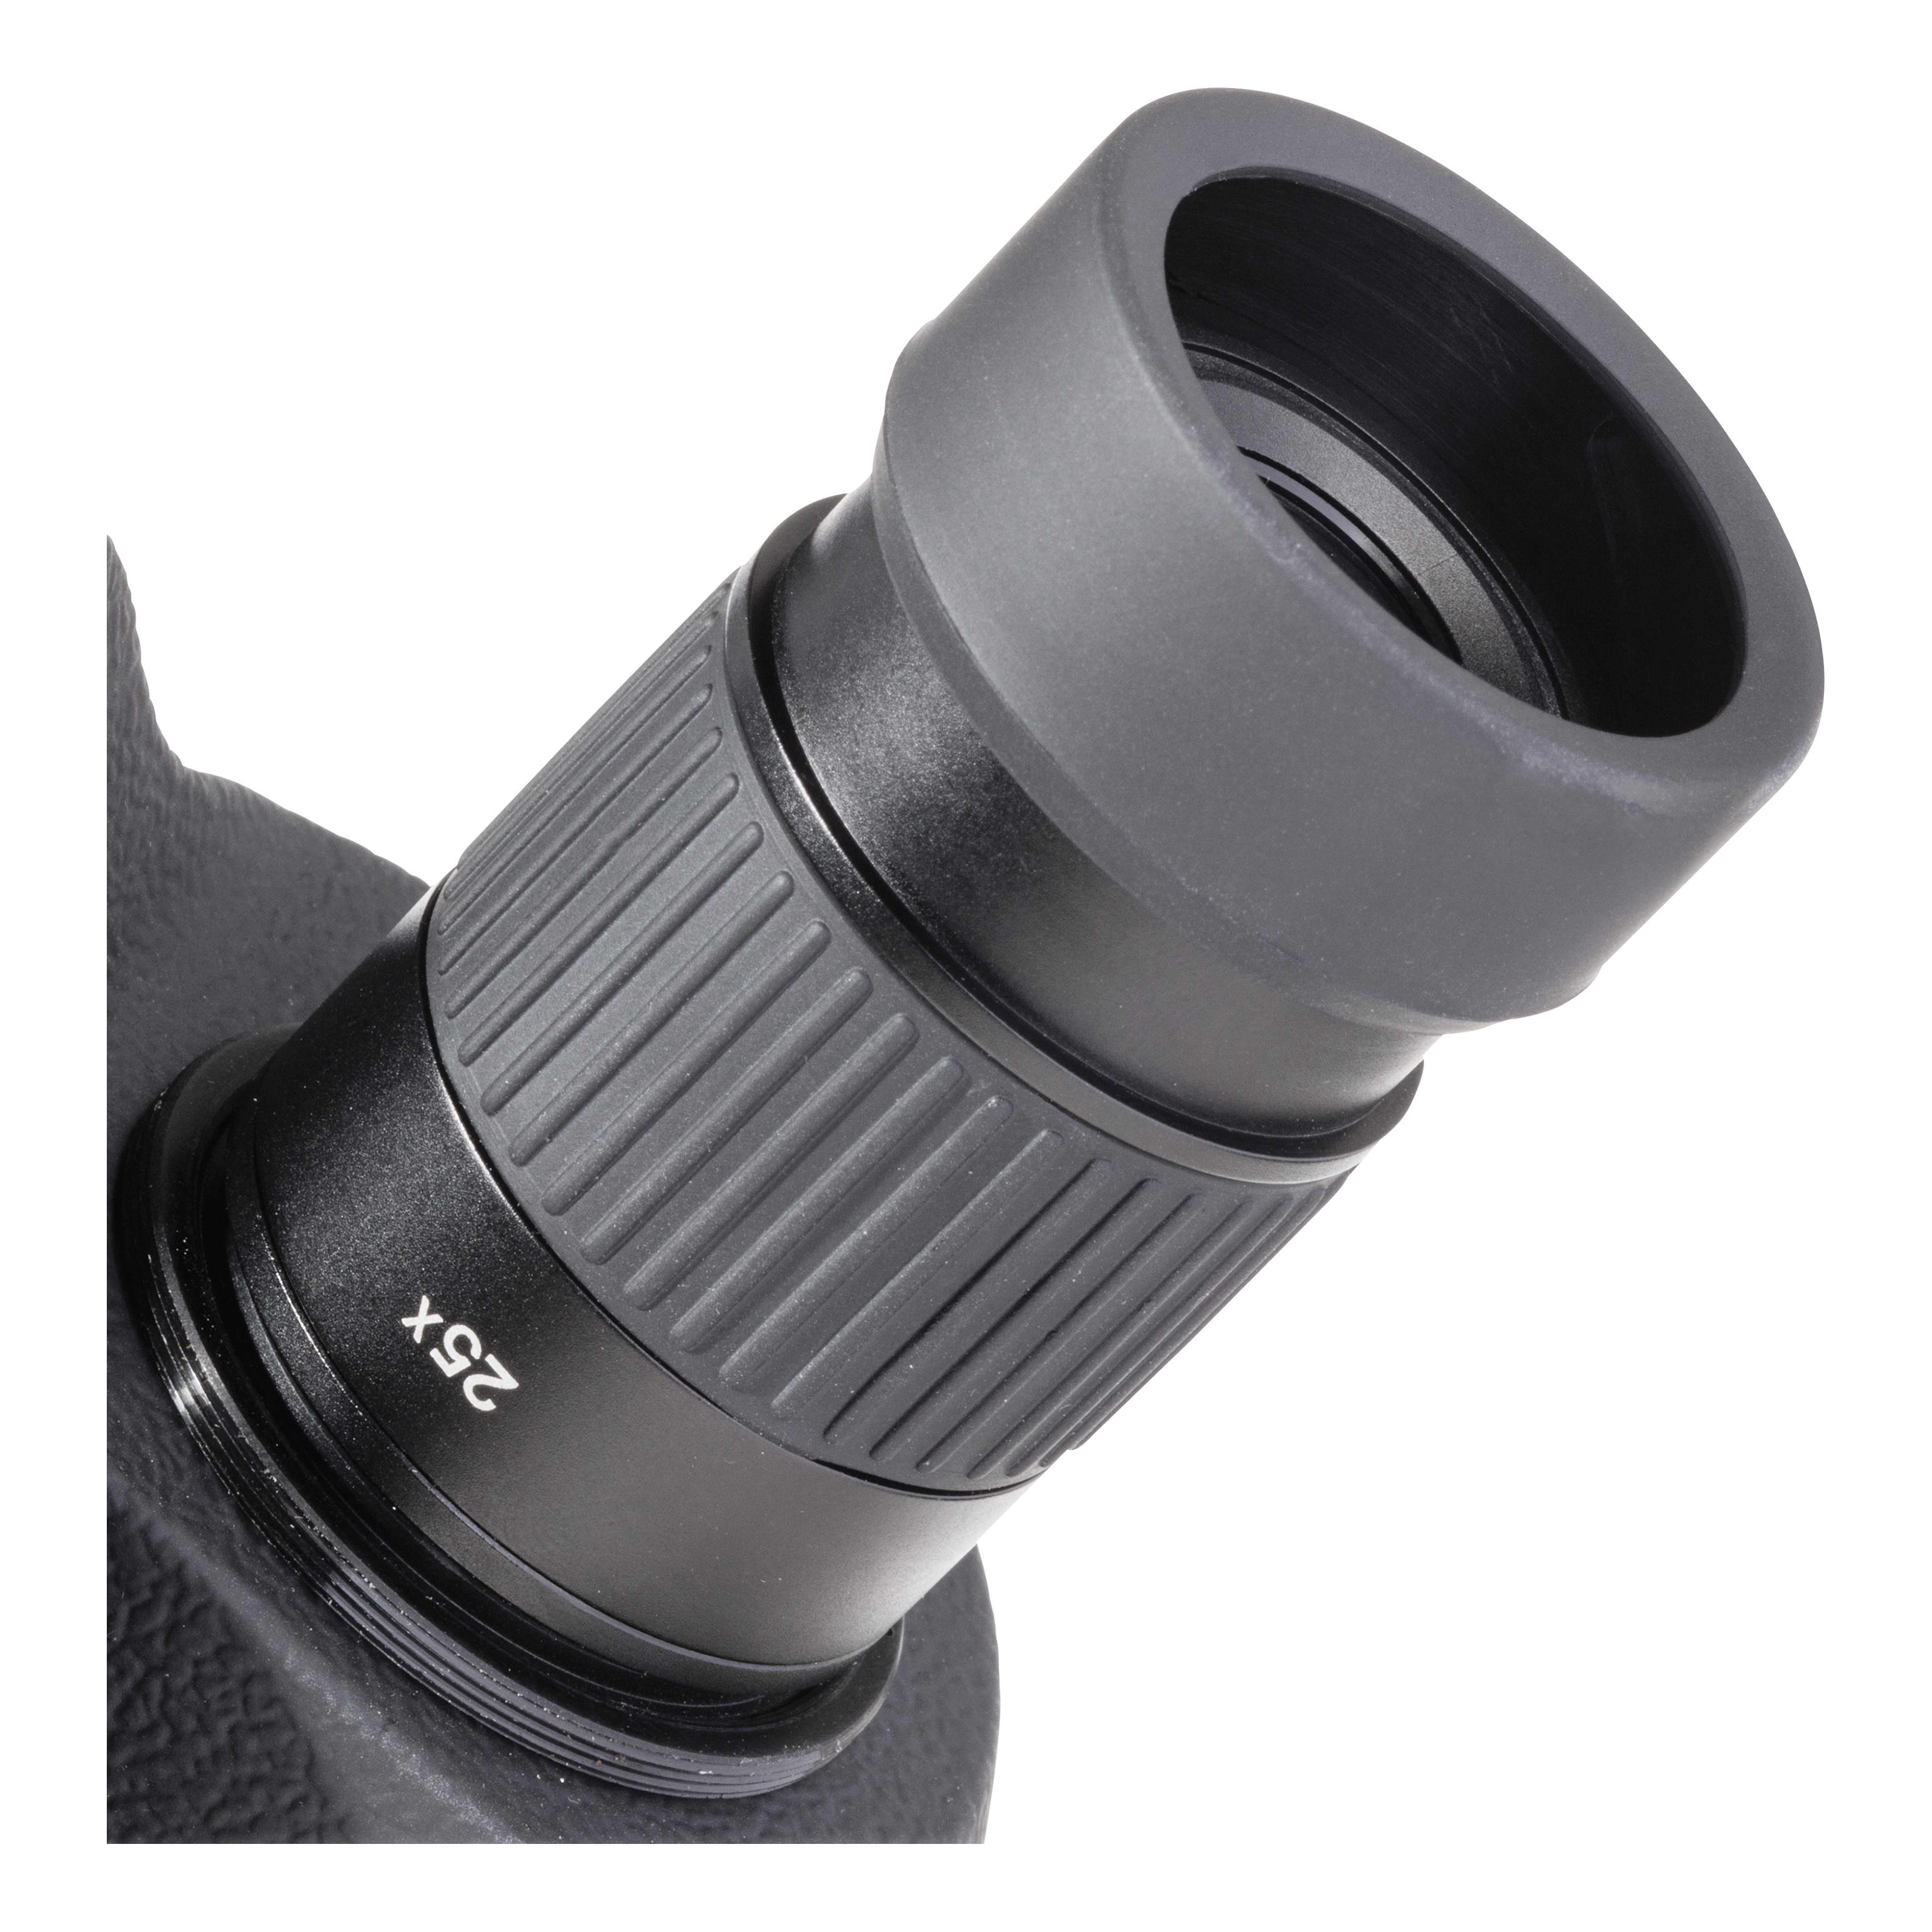 Pursuit® X1 Compact Spotting Scope - Angled Eyepiece View